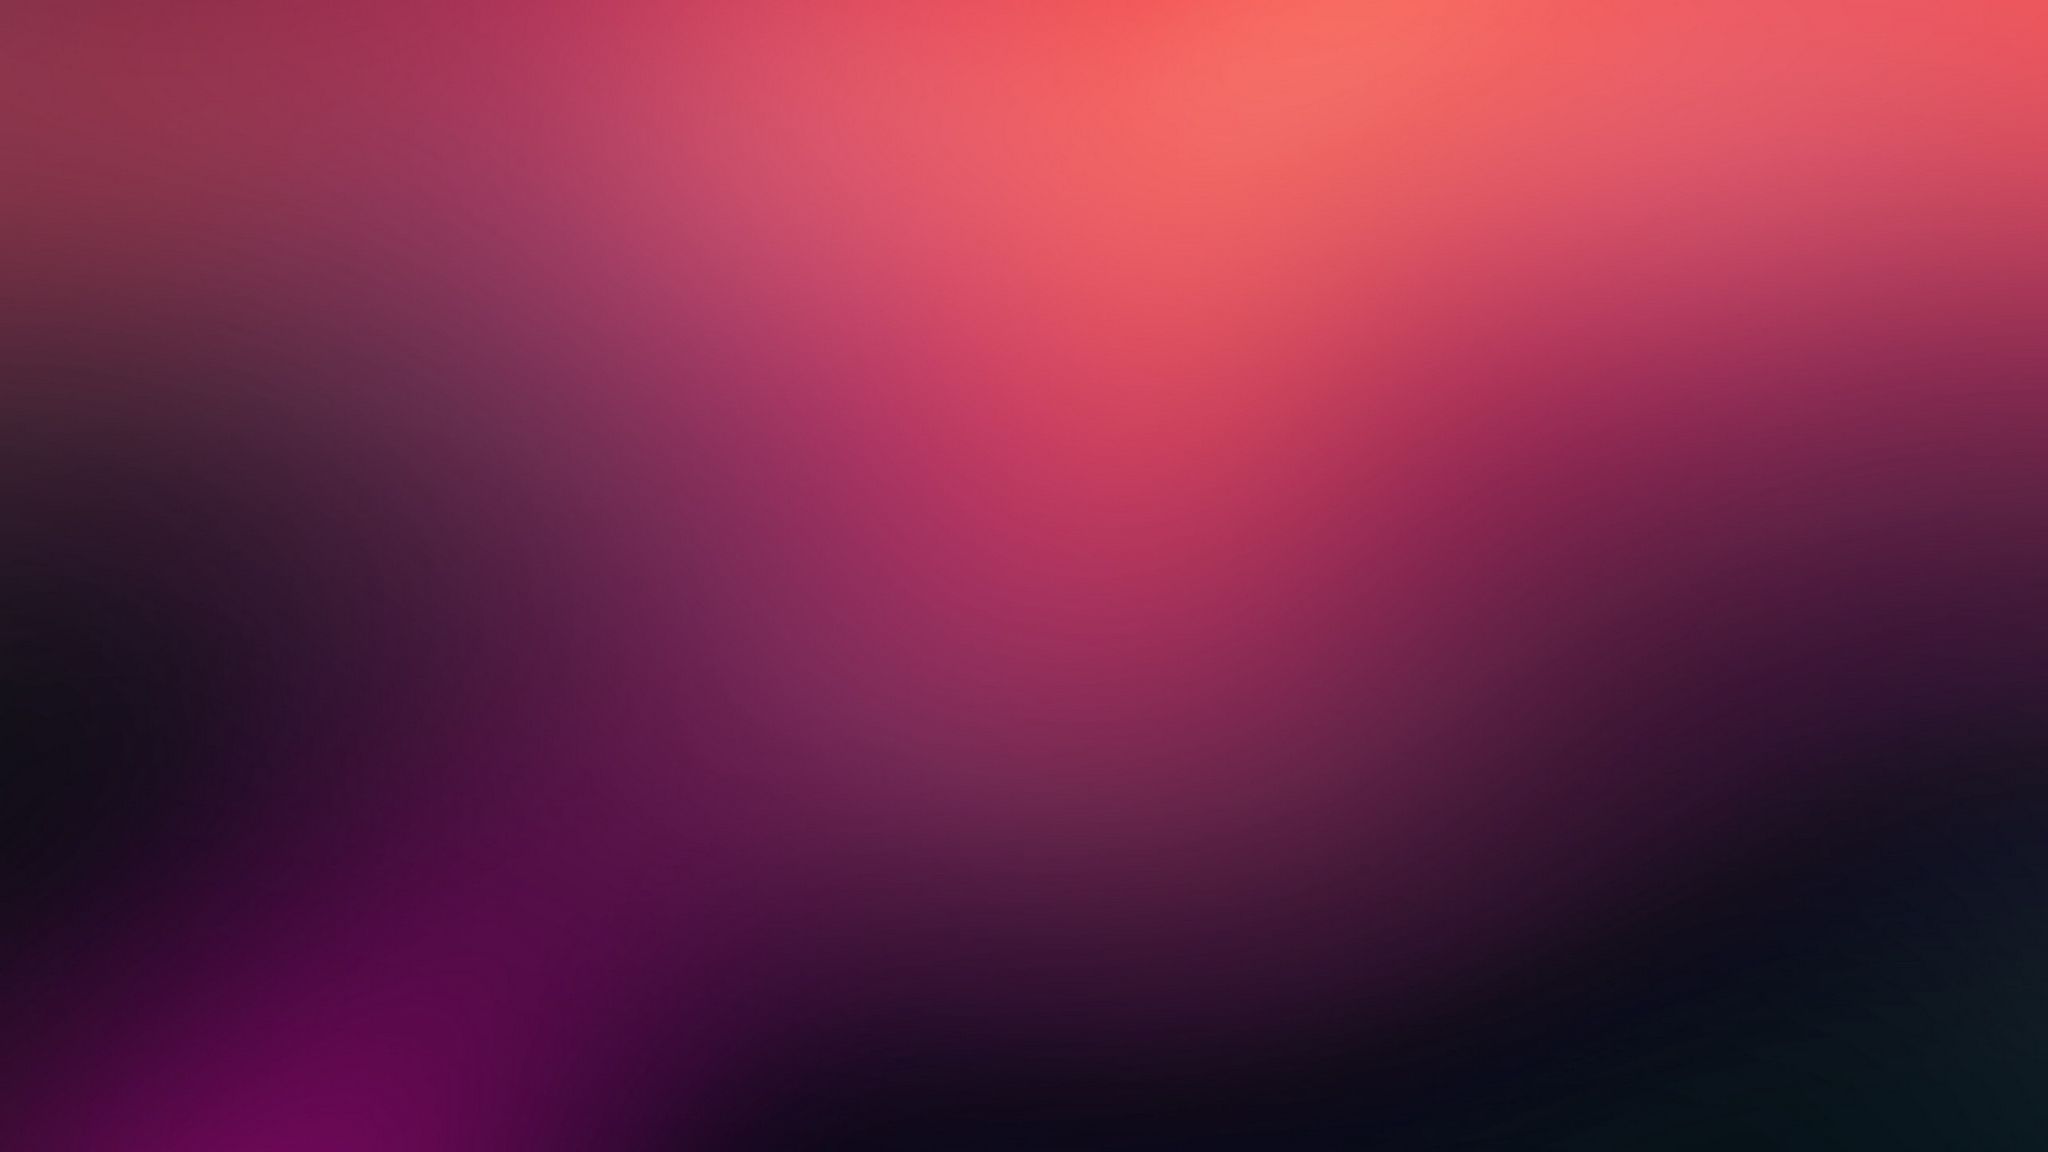 Download Wallpaper Colorful Aesthetic Gradient Background